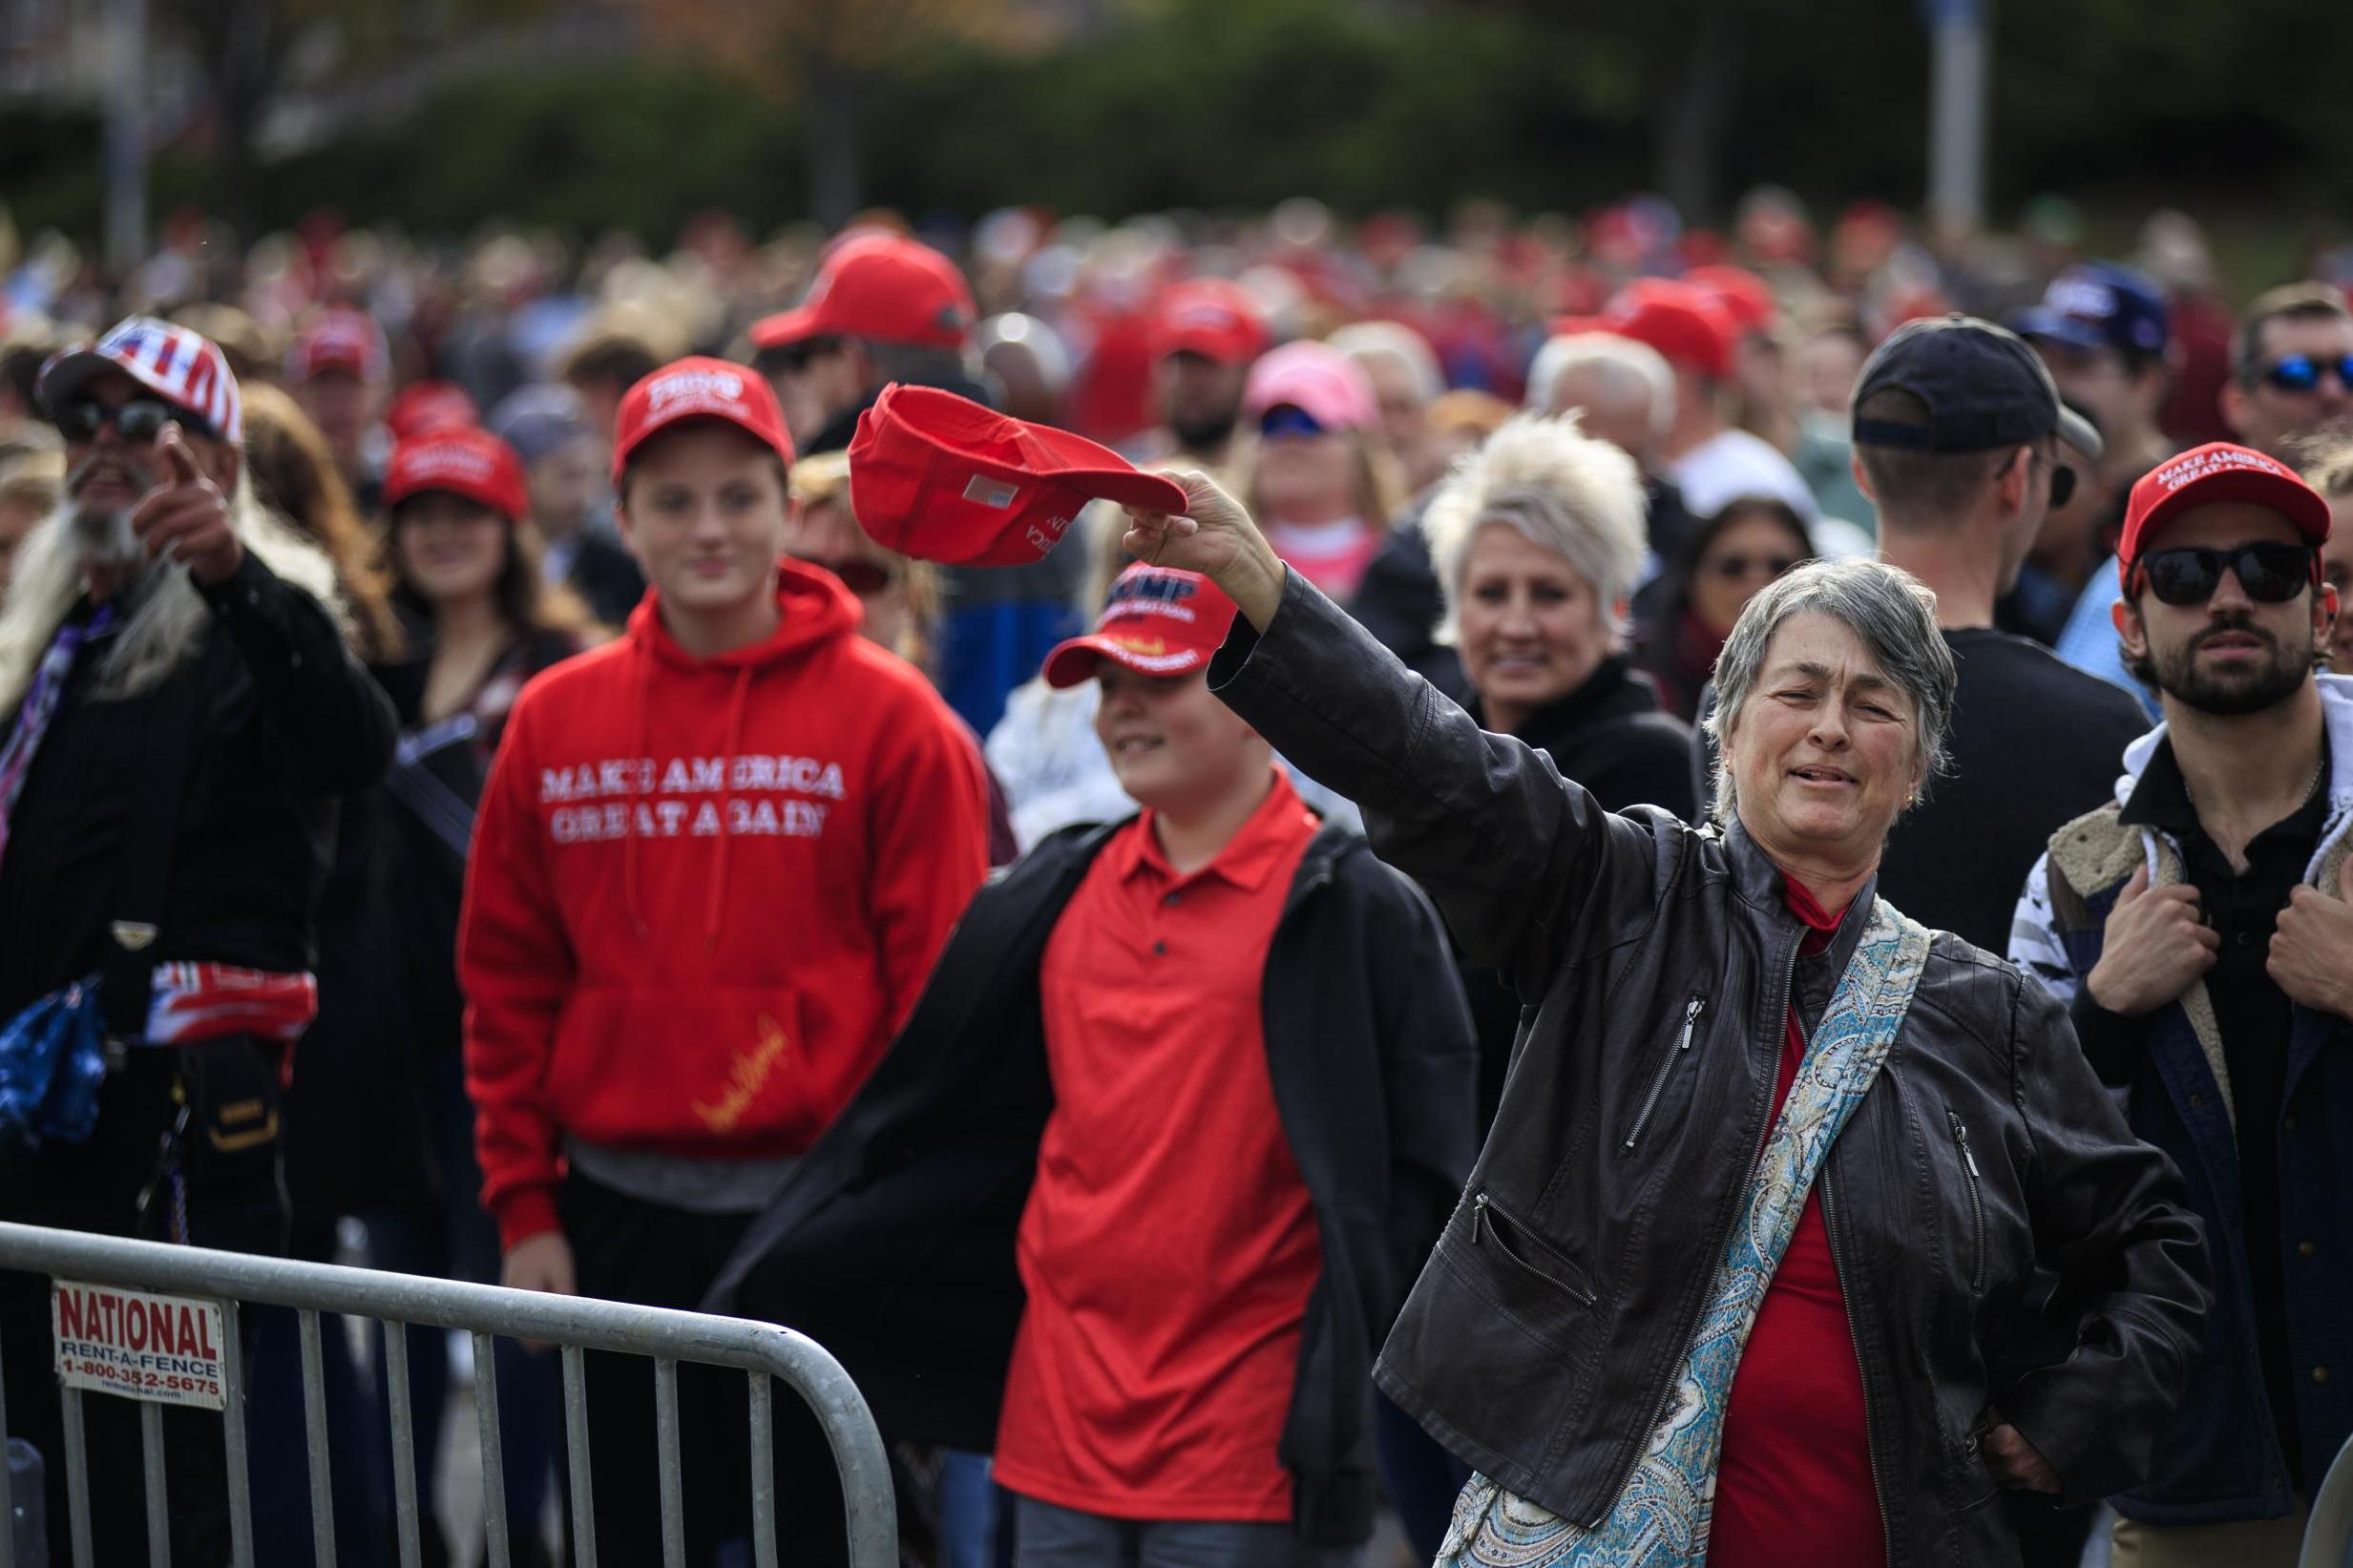 Midterms 2018: Inside Trump&apos;s Tennessee &apos;Maga&apos; rally on the eve of crucial elections – &apos;Trump is literally my idol&apos;